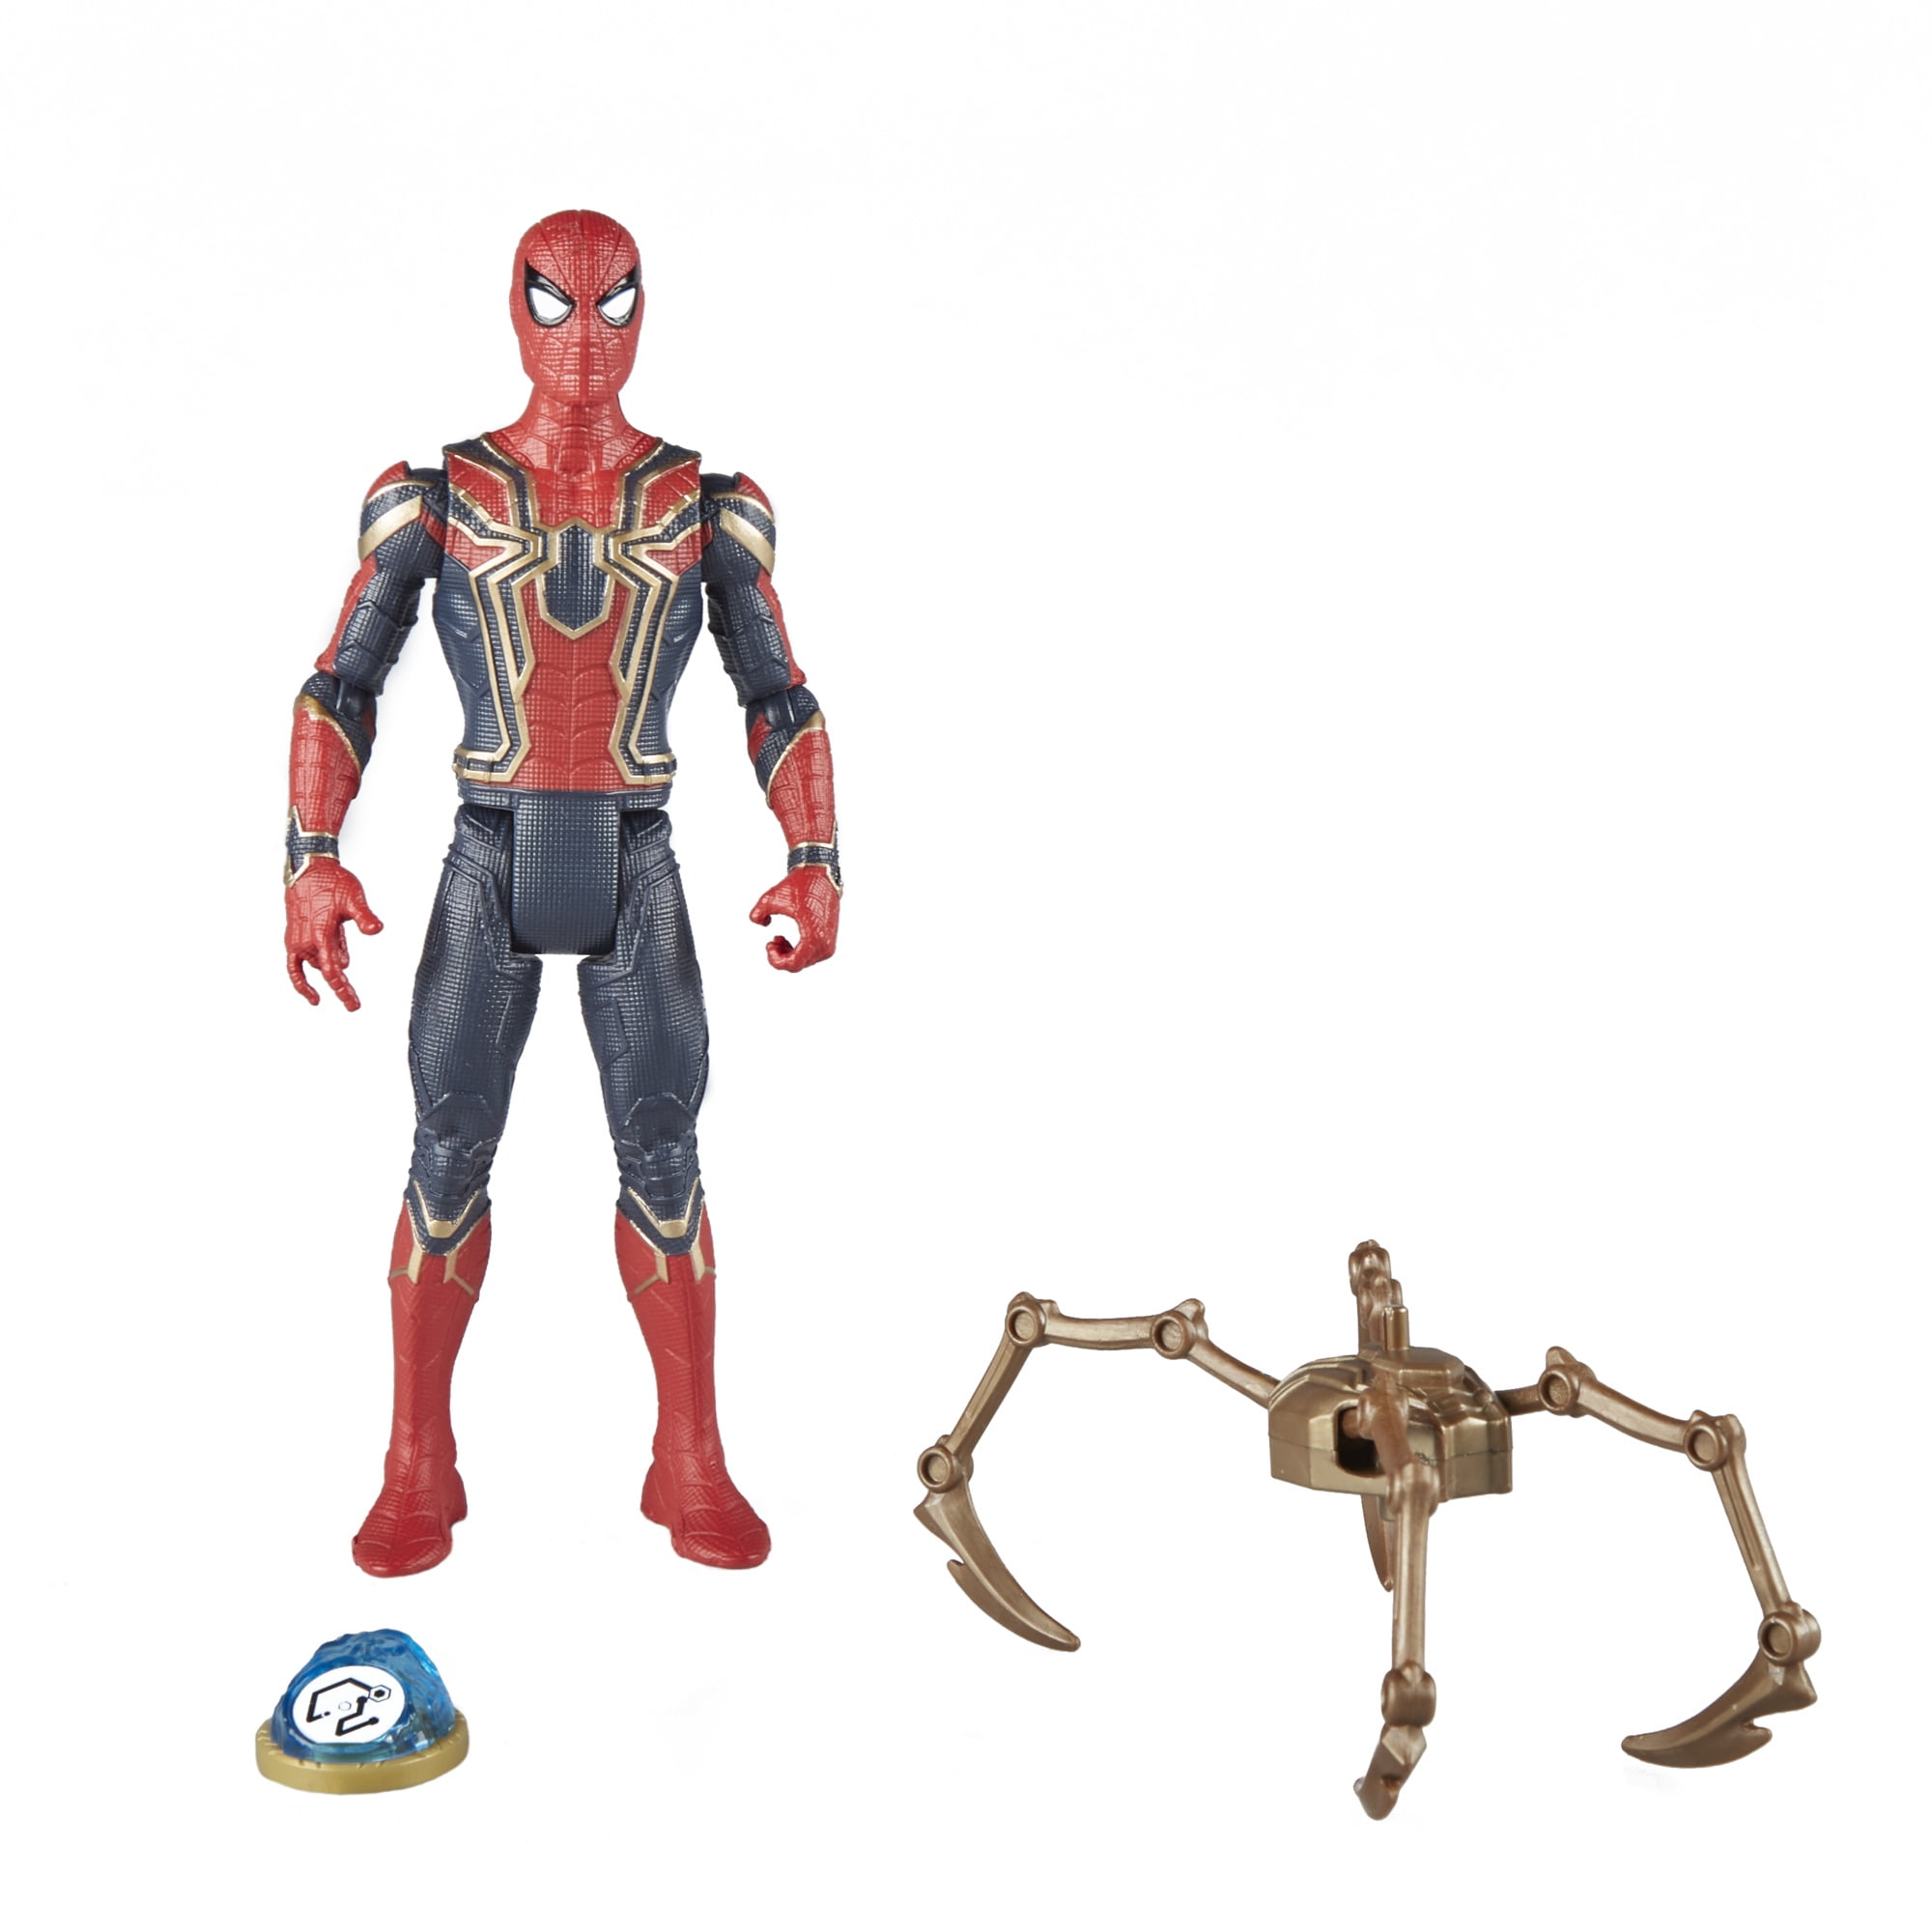 Marvel Infinity War Avengers Iron Spider Spiderman w/ Tentacles 6" Action Figure